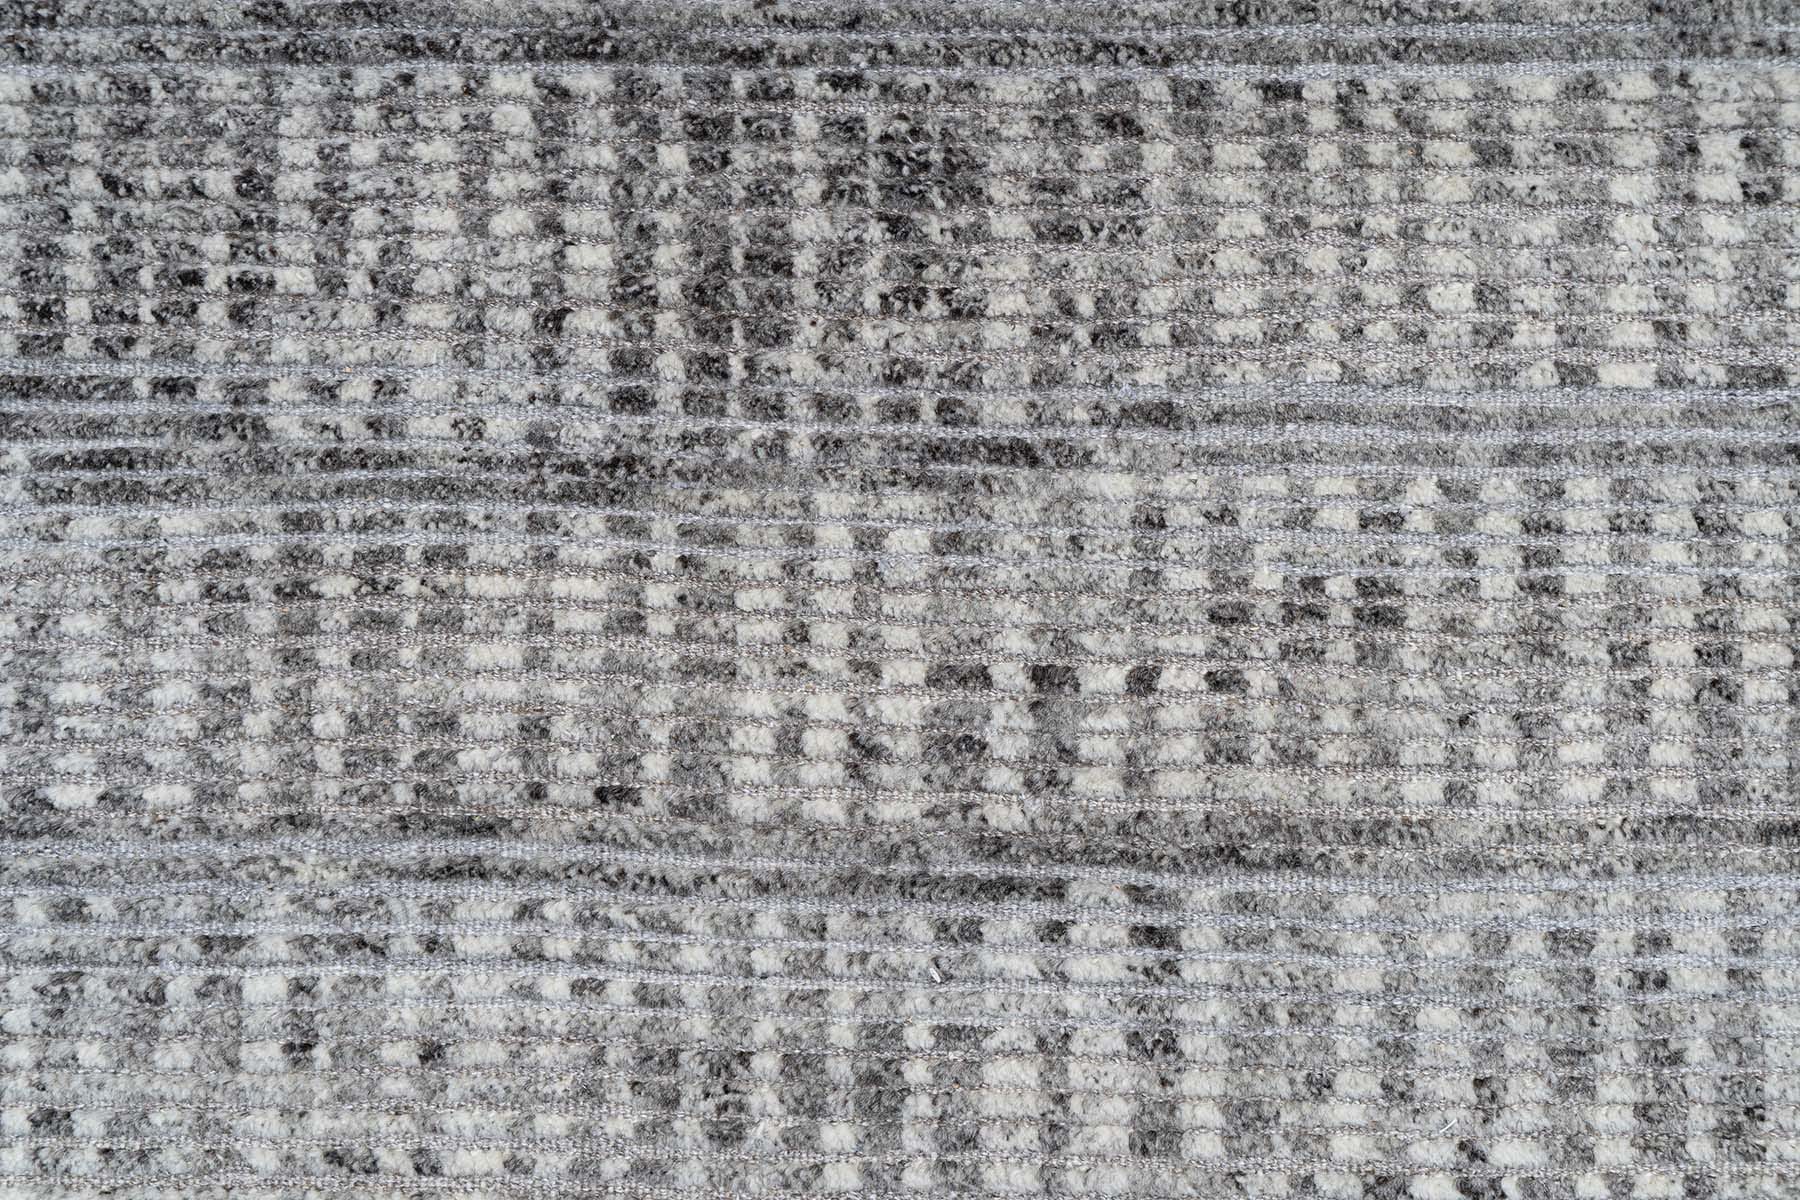 Sybil Hand Knotted Wool Rug